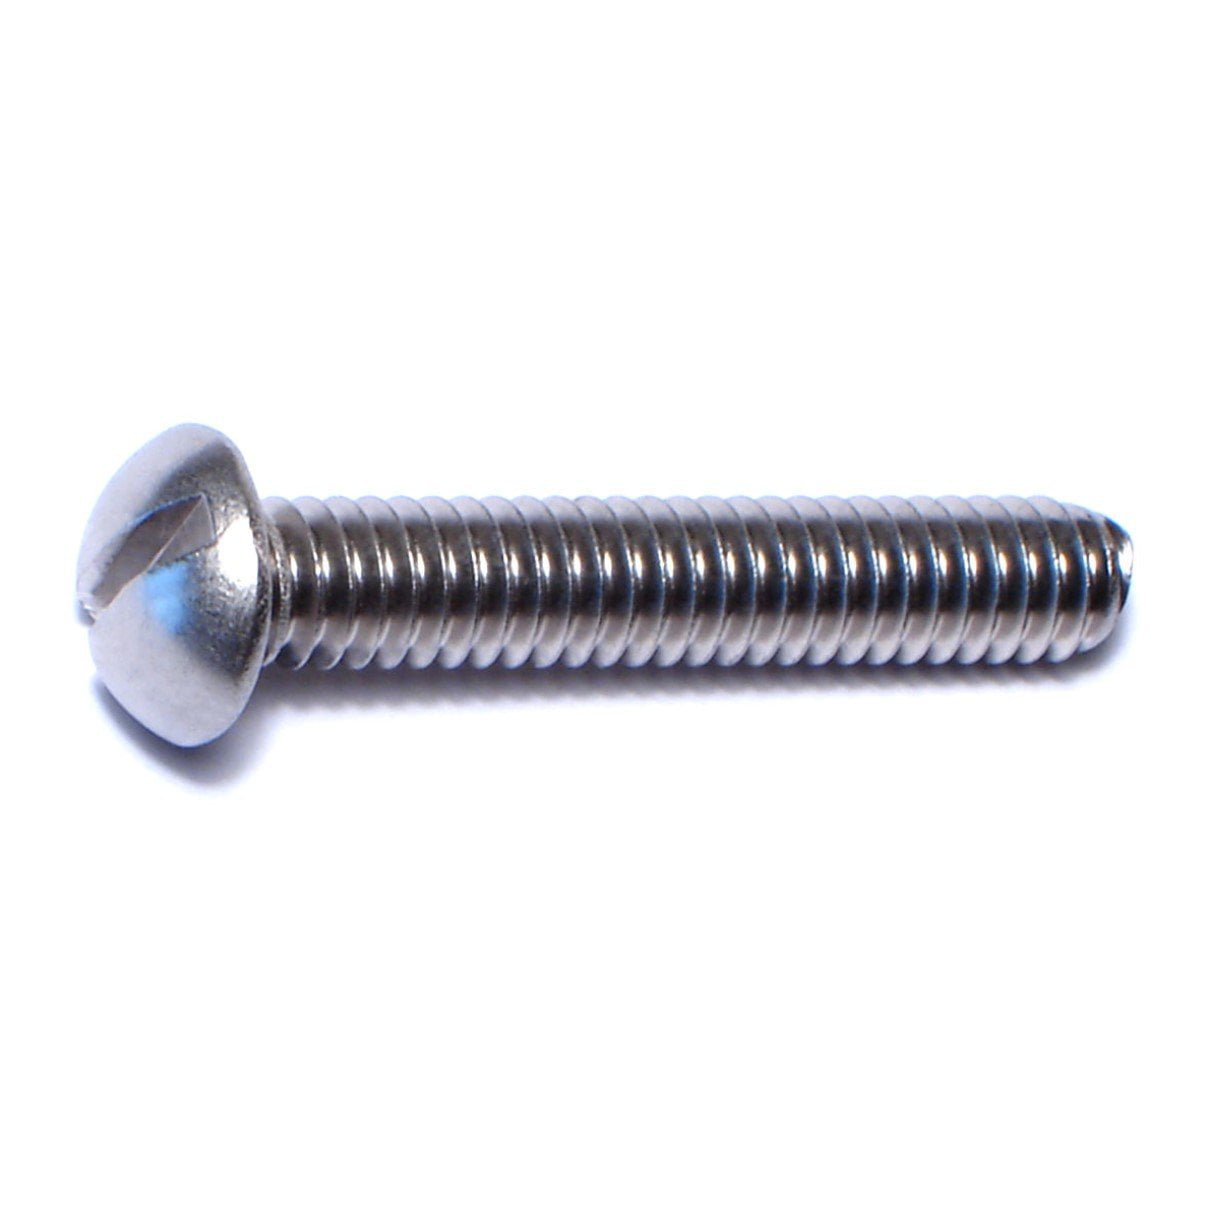 1/4-20 x 1-1/2" Slotted Round Head Machine Screws Stainless Steel 18-8 Qty 100 